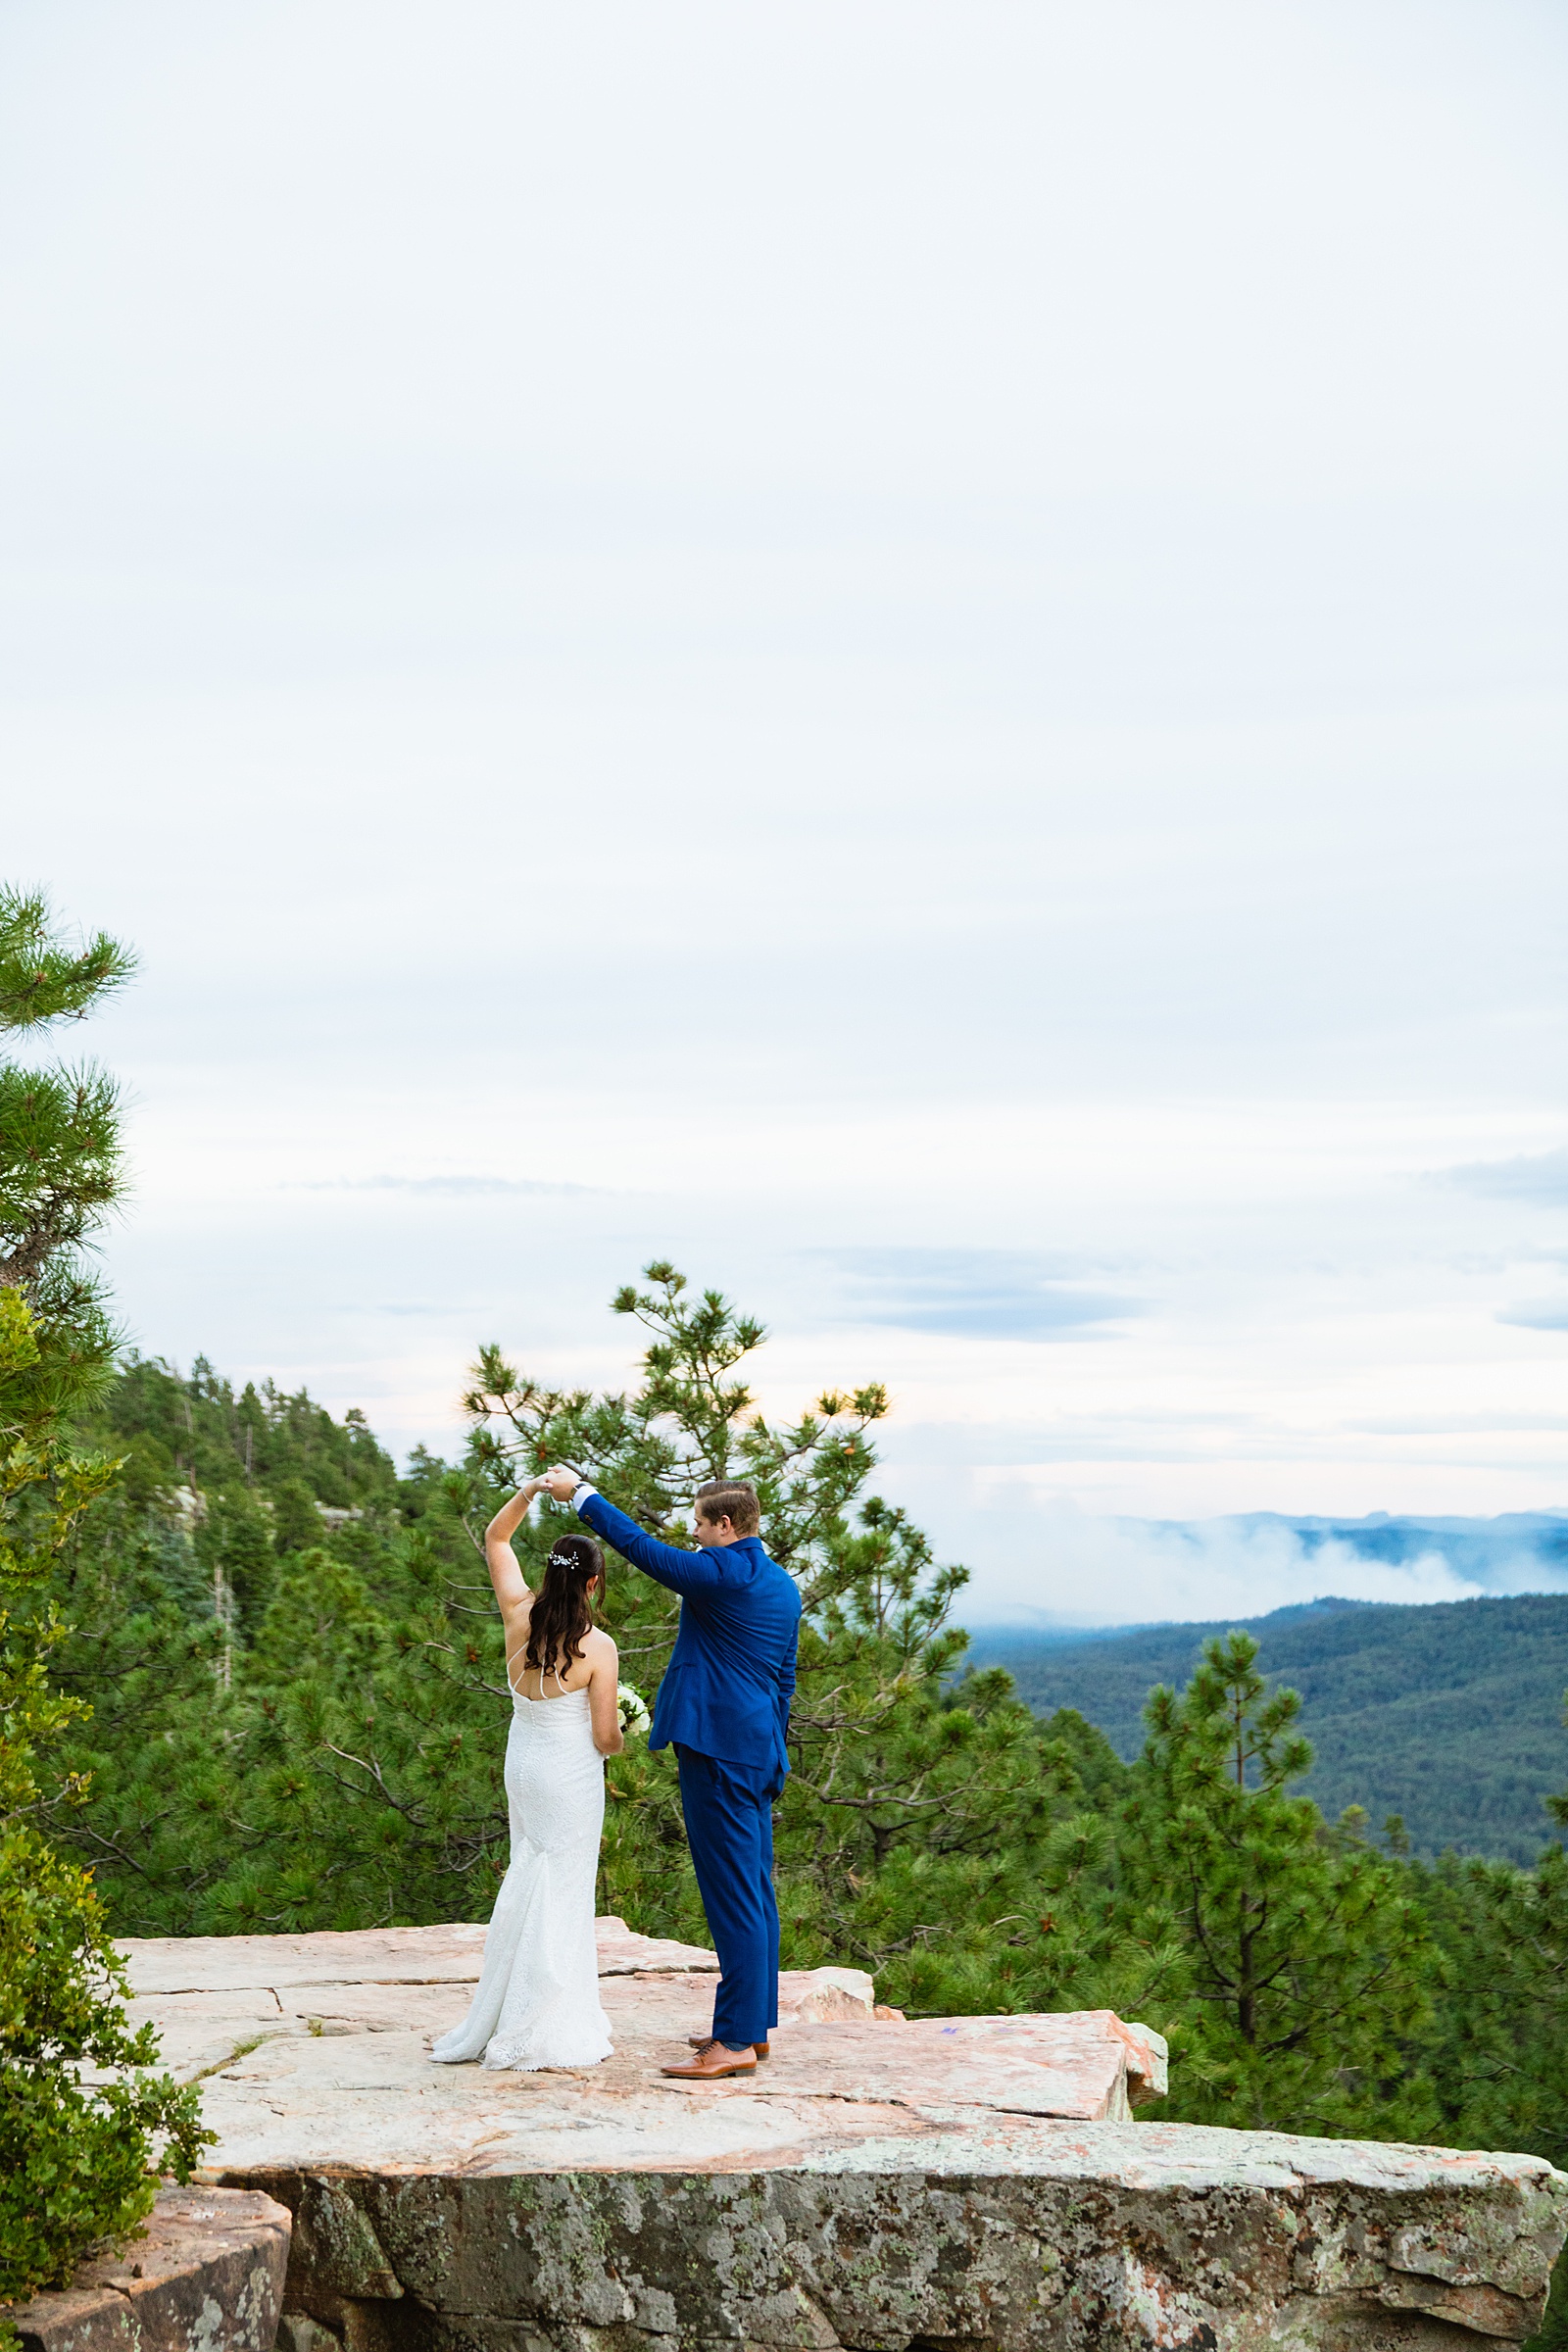 Bride & Groom dancing together during their Mogollon Rim elopement by Arizona elopement photographer Juniper and Co Photography.